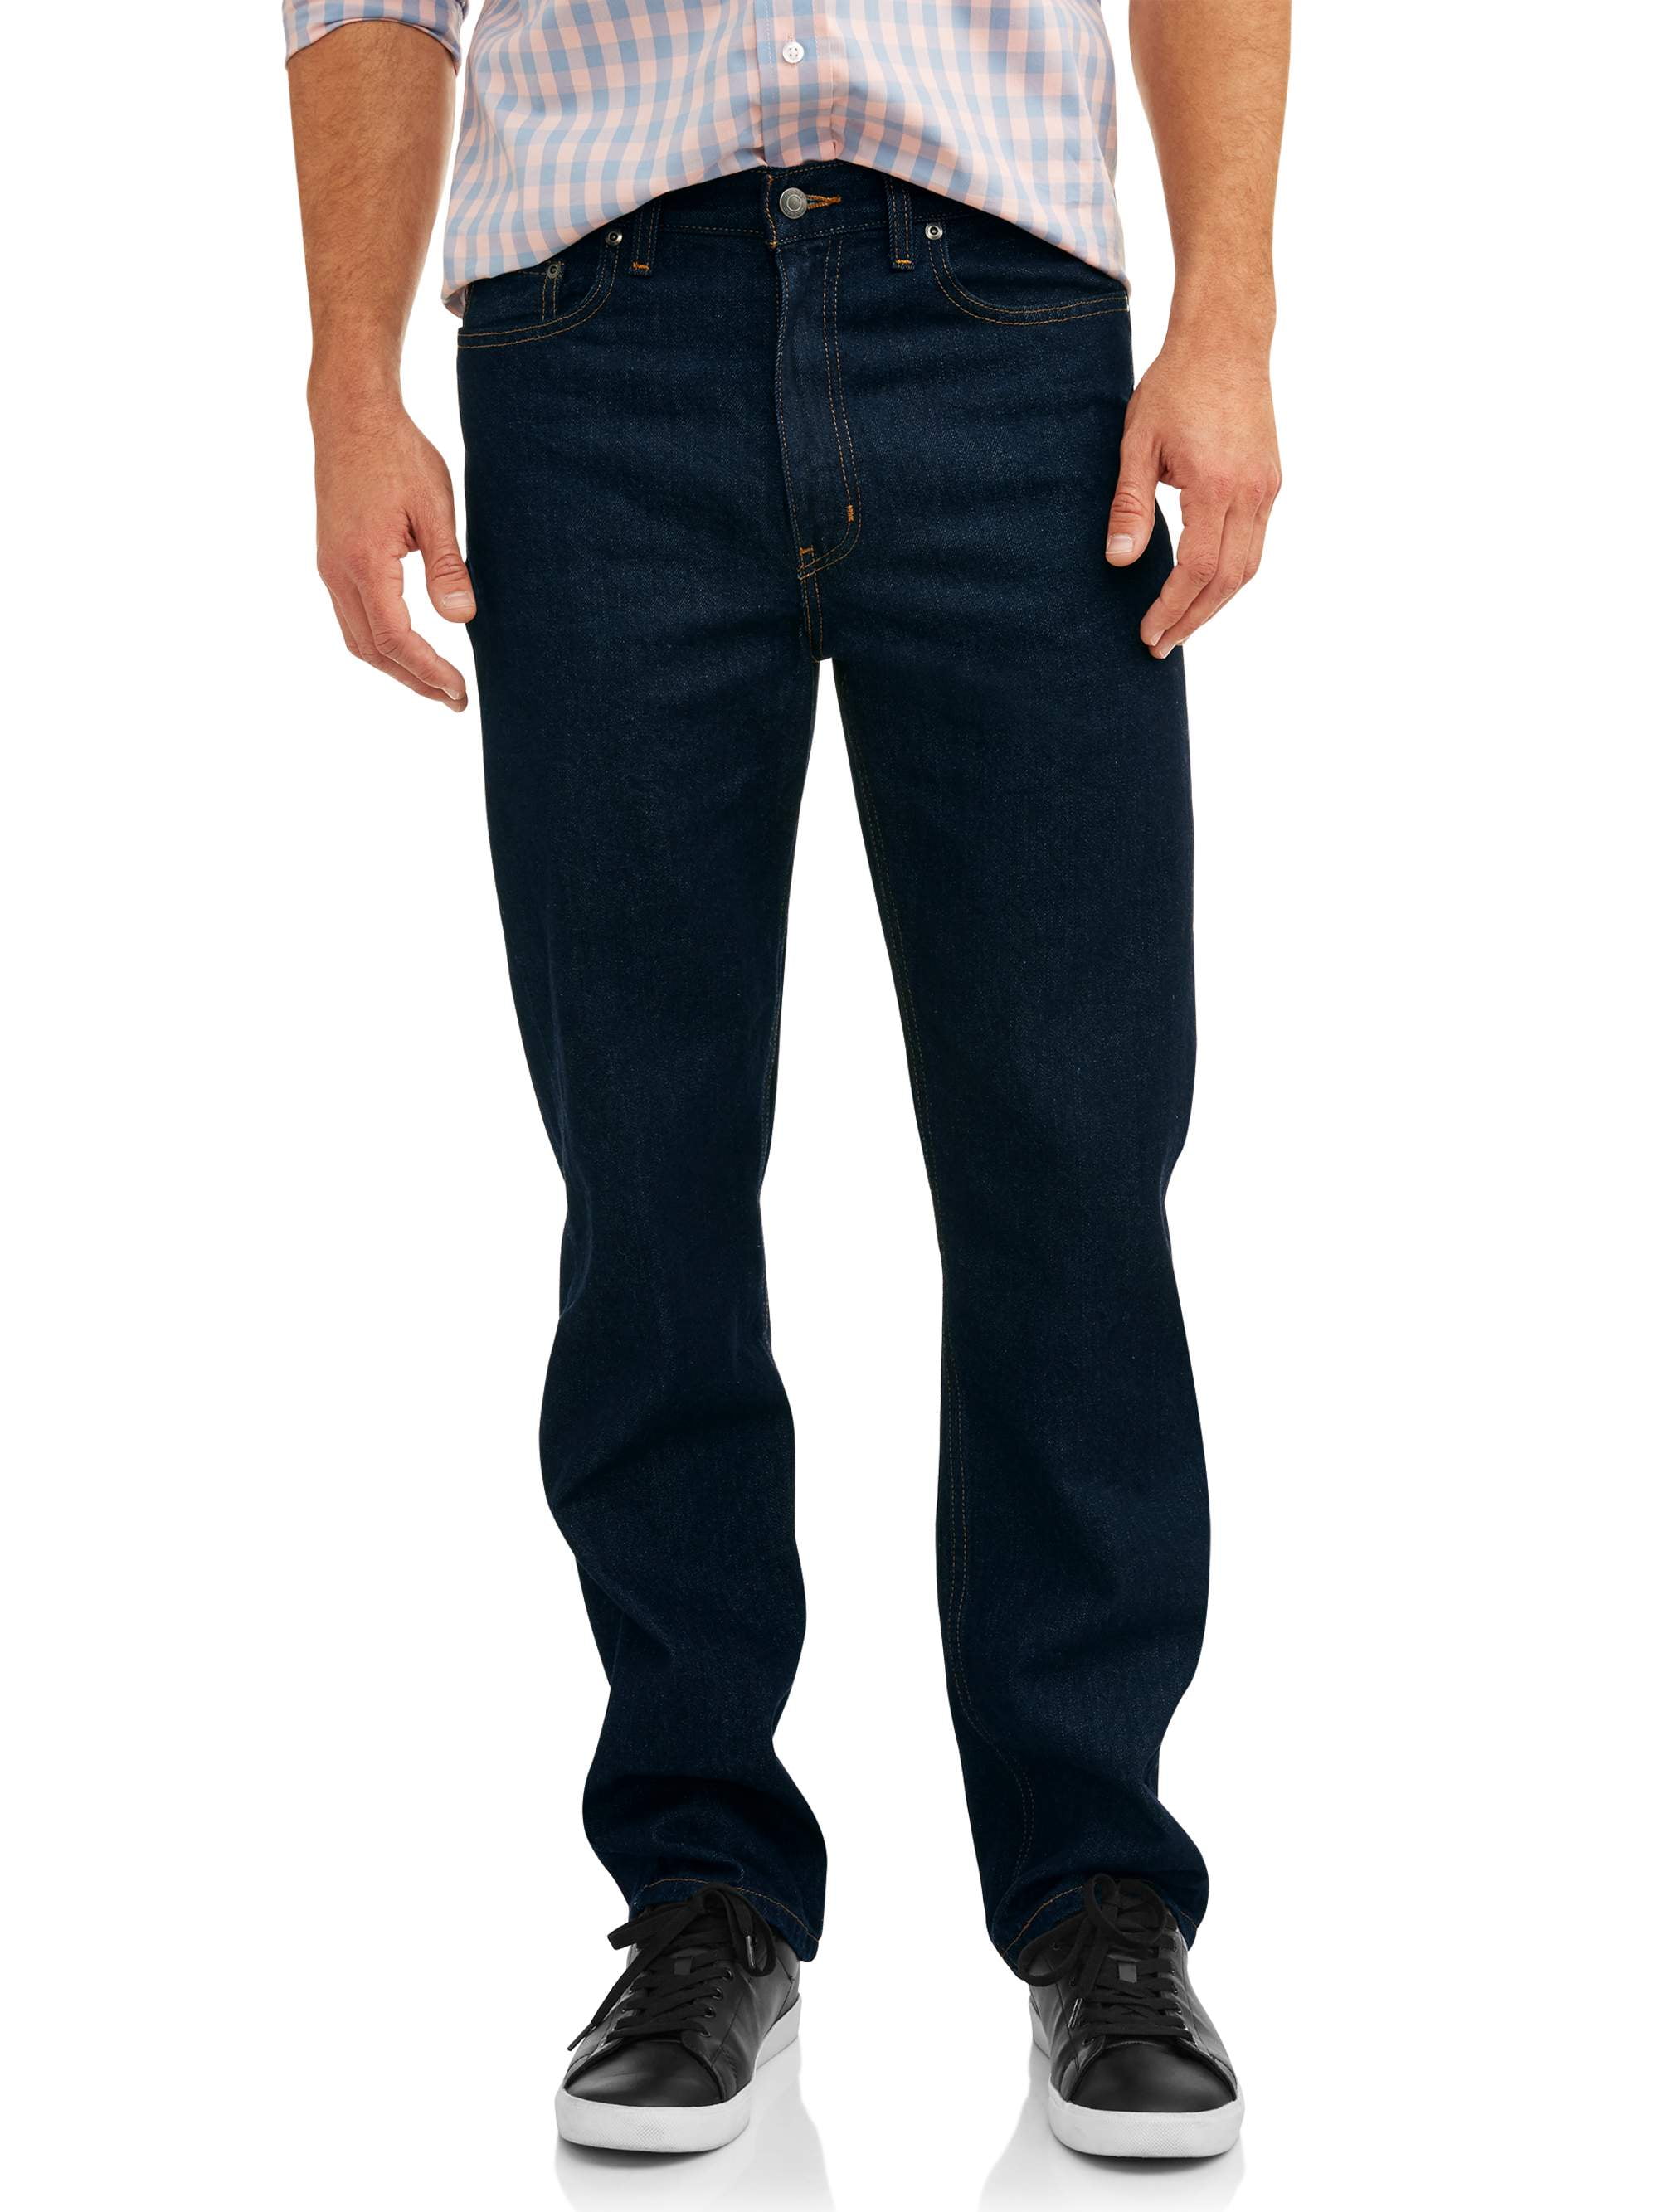 George Men's and Big 100% Cotton Relaxed Fit Walmart.com